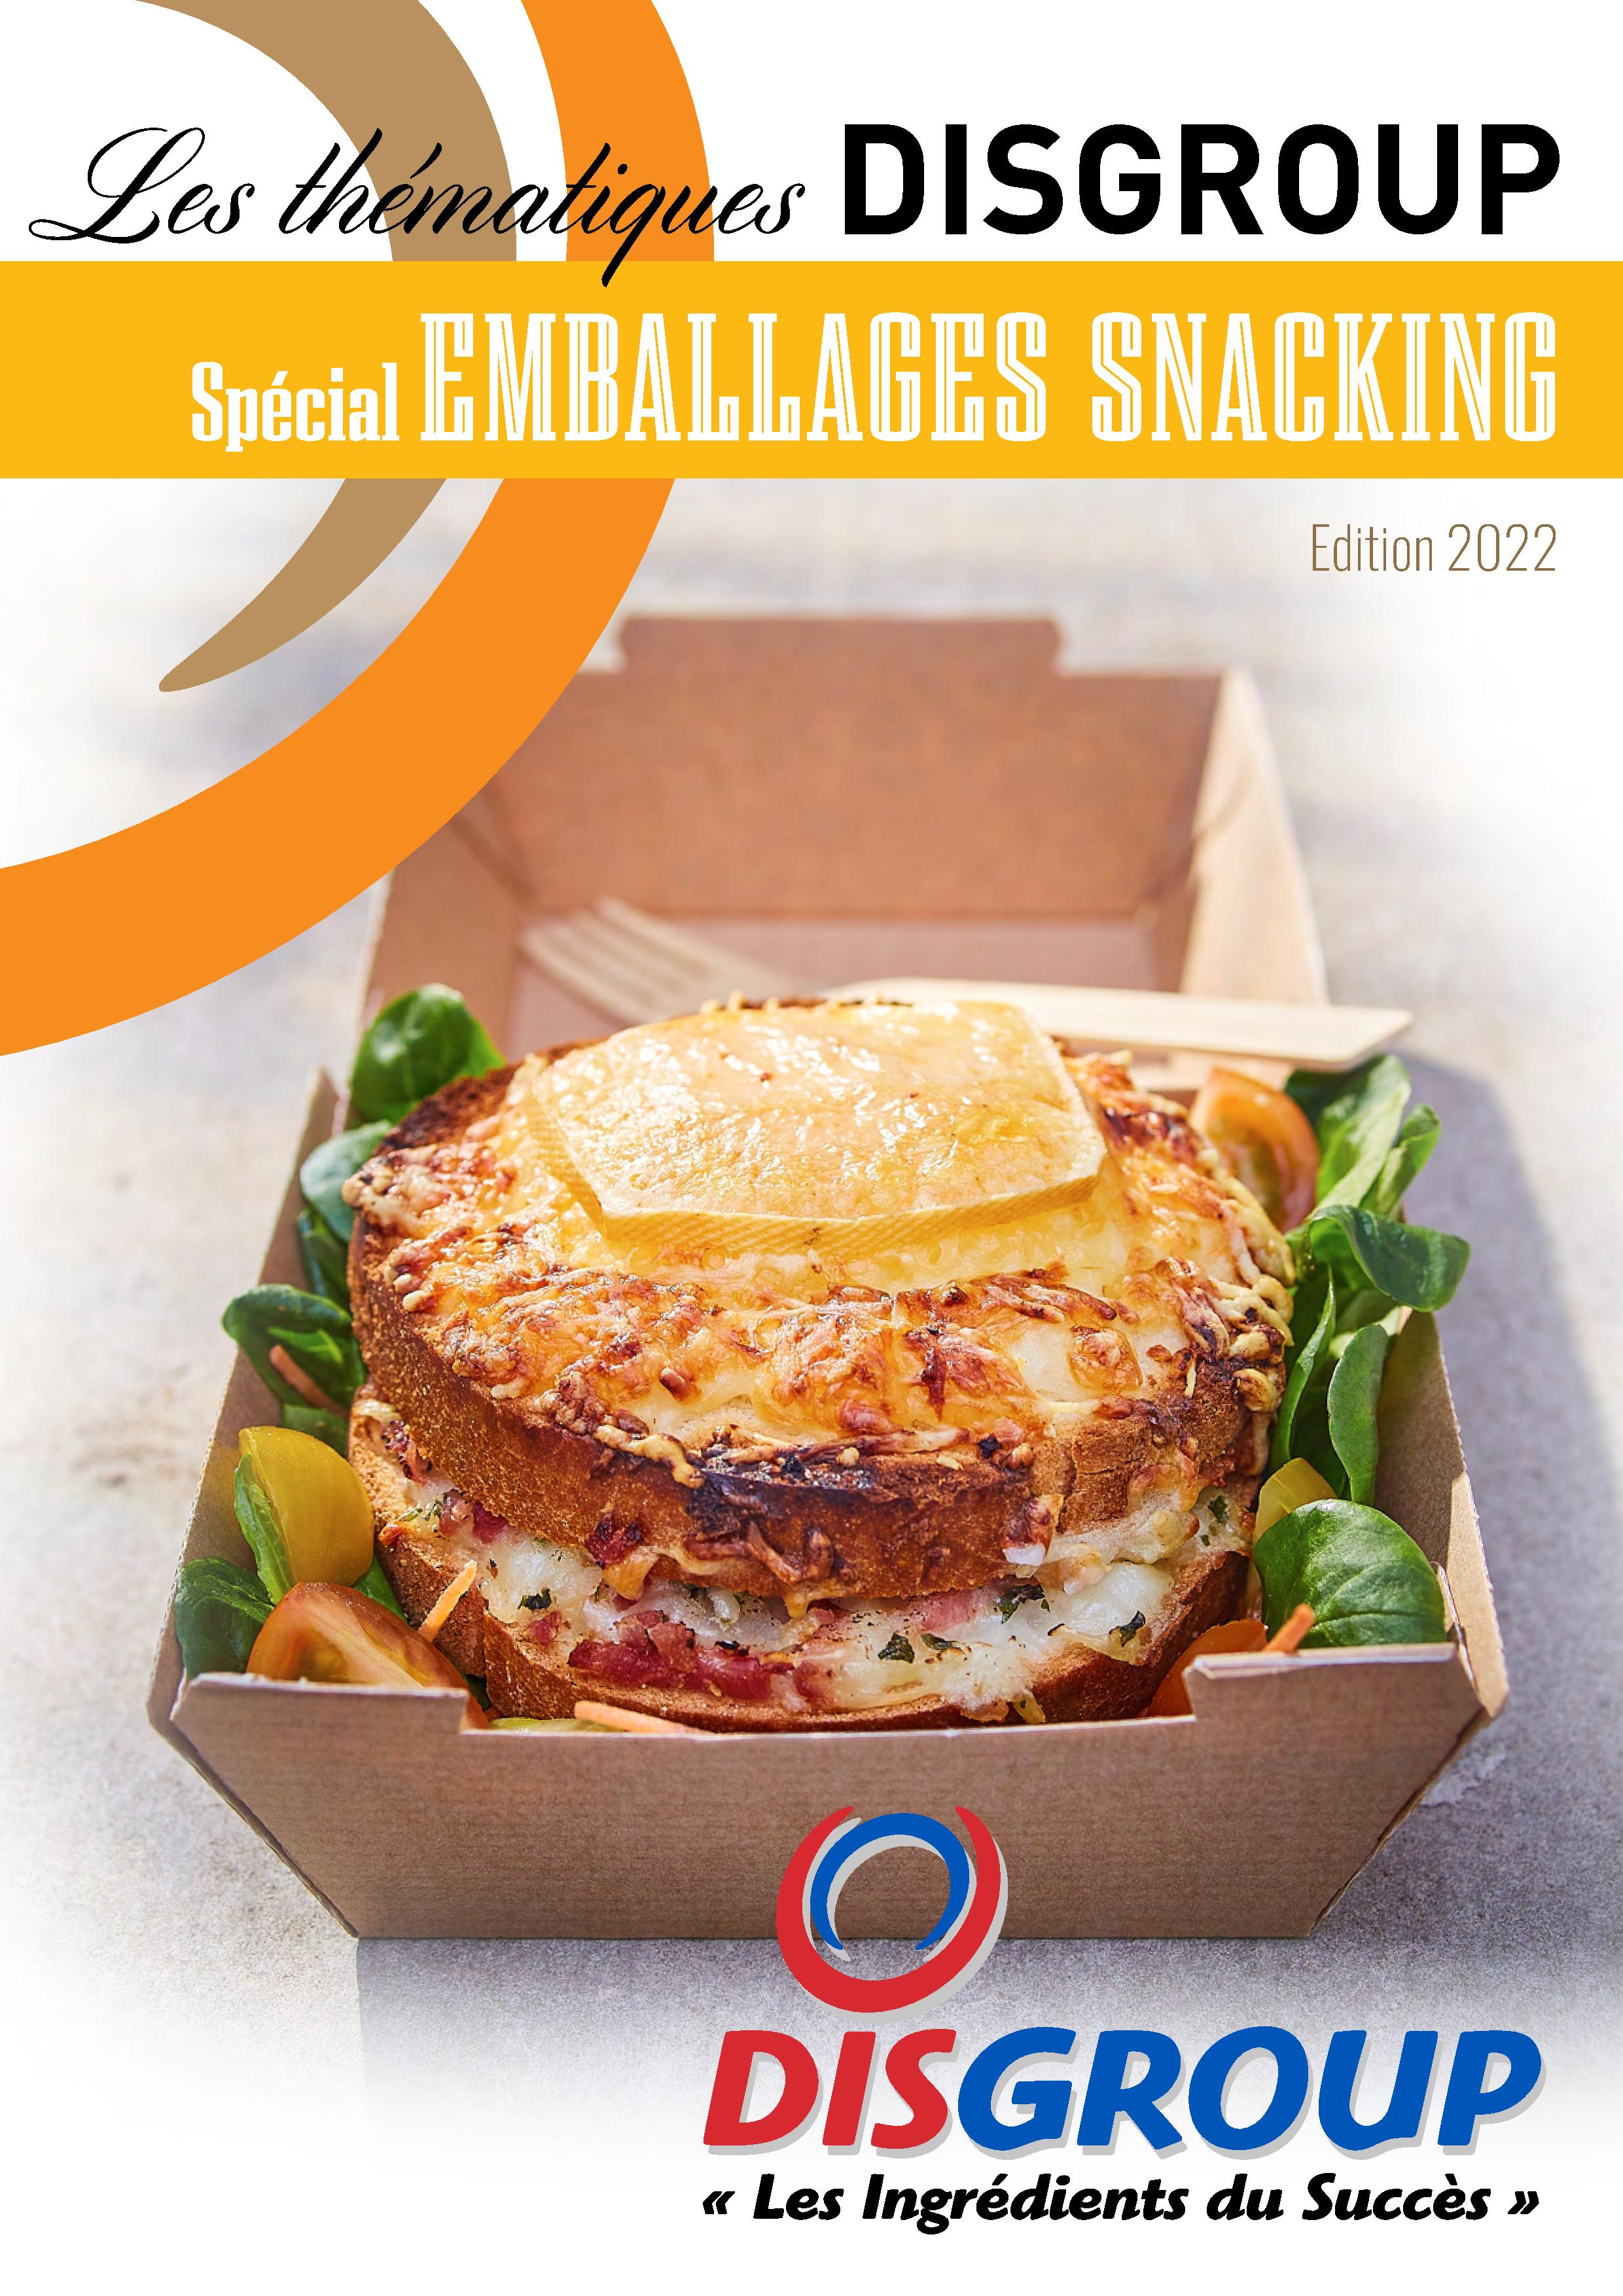 catalogue thematique special emballages snacking 2022 984 001